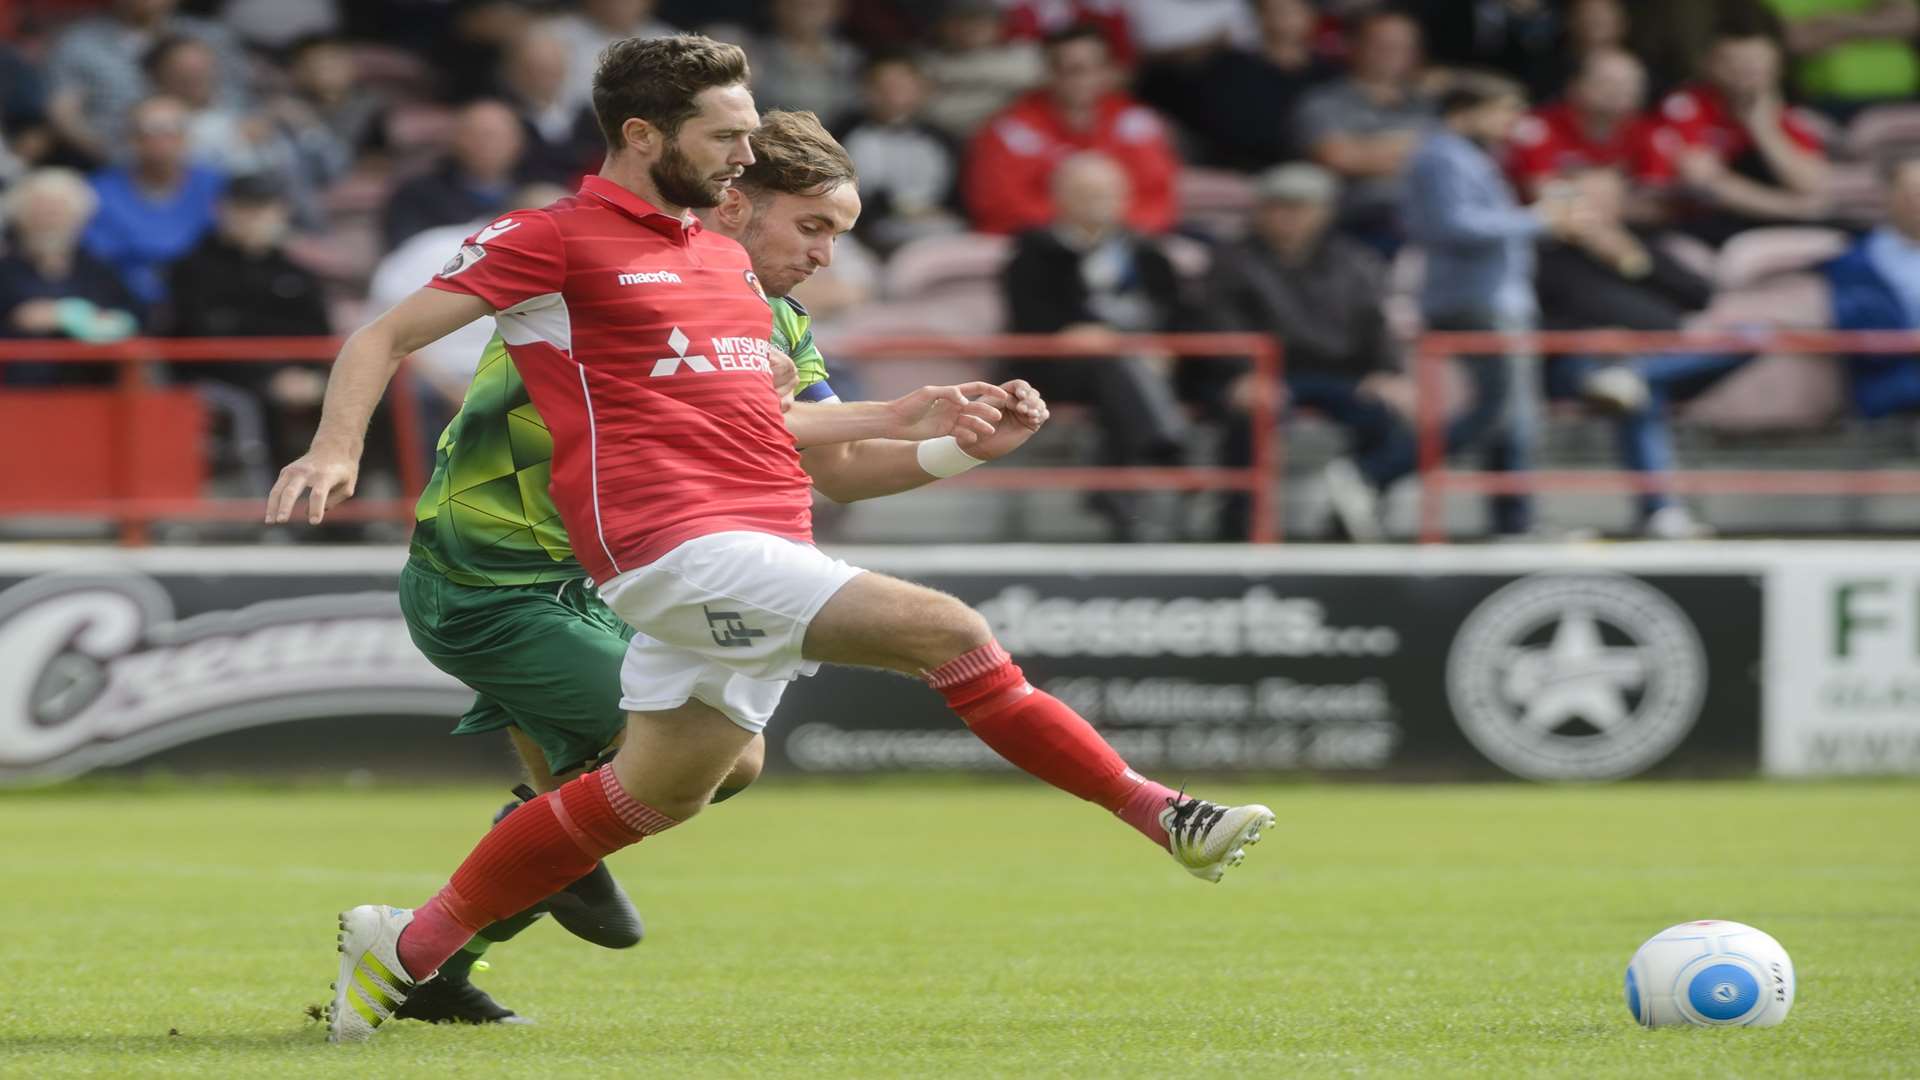 Dean Rance has spent the last four seasons at Ebbsfleet Picture: Andy Payton